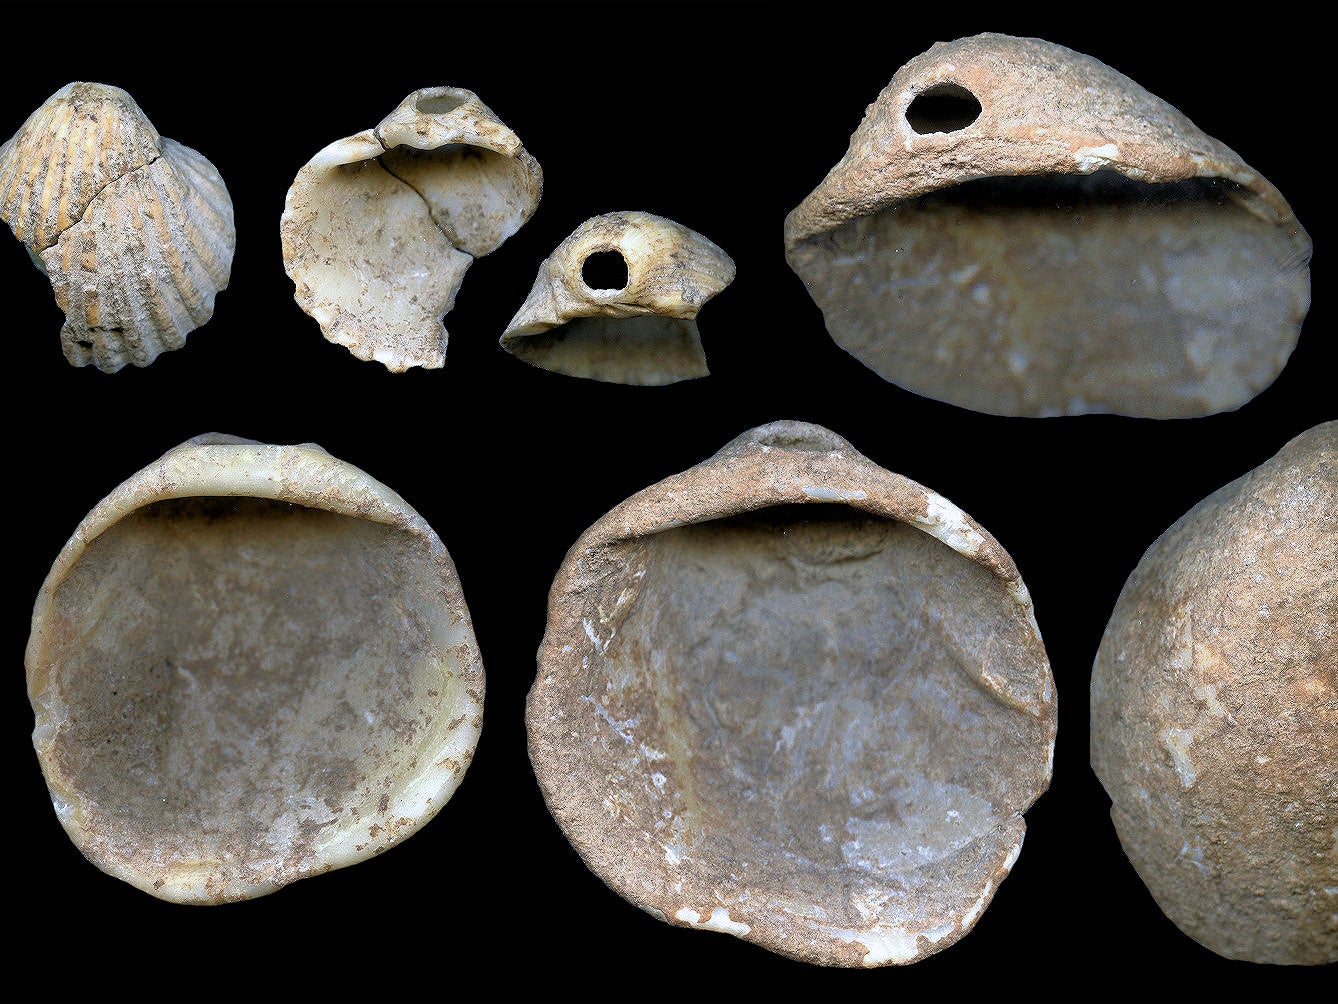 Perforated shells found by archaeologists and attributed to Neanderthals. Some of these shells had remnants of pigments on them (J Zilhao)